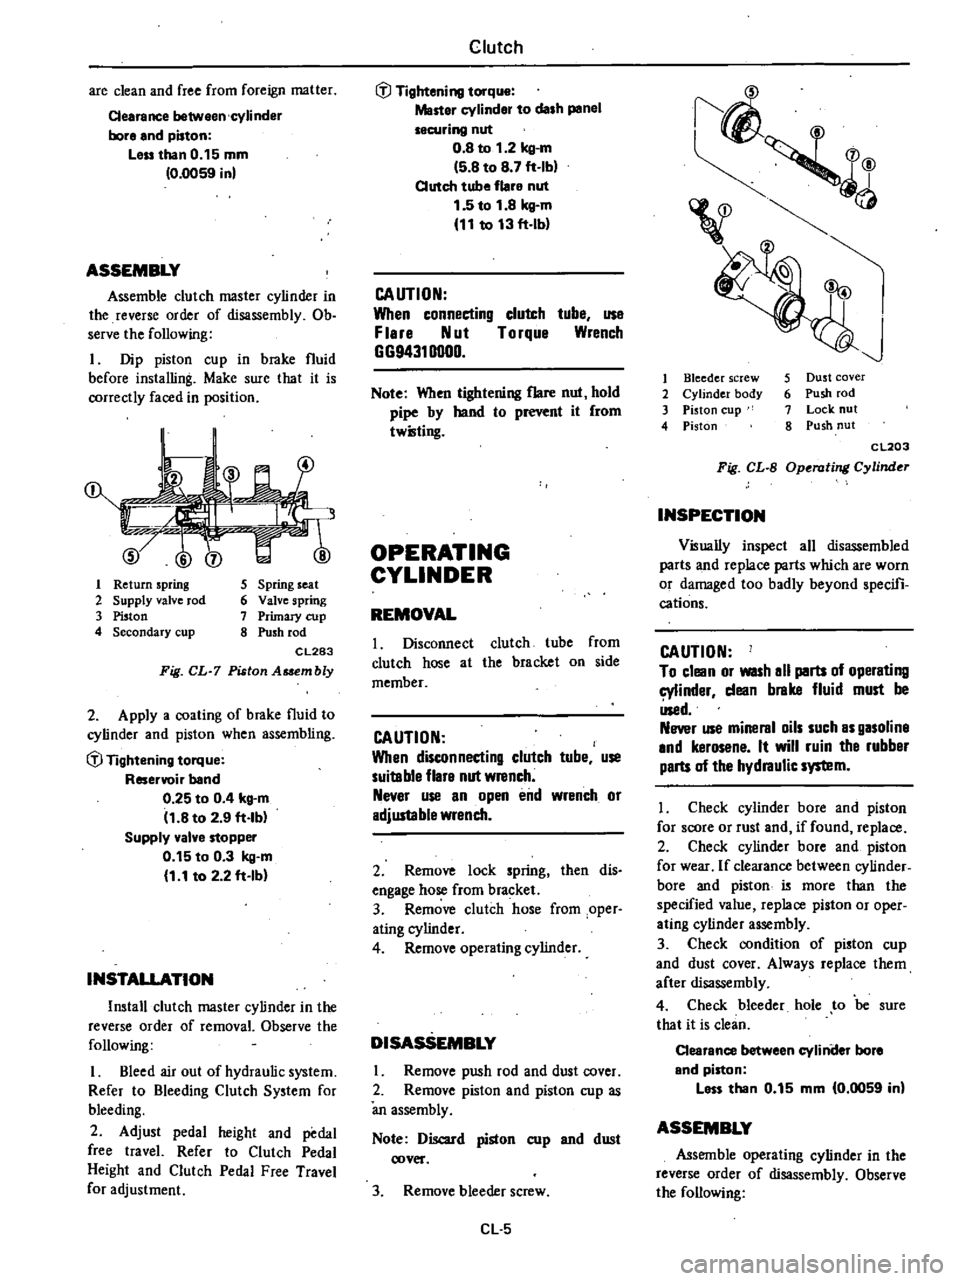 DATSUN 210 1979  Service Manual 
are

clean 
and 
free 
from

foreign 
matter

Cearance 
between

cylinder

bore 
and

piston

Leu 
than 
0 
15

mm

0 
0059 
in

ASSEMBLY

Assemble 
clutch 
master

cylinder 
in

the 
reverse 
order 